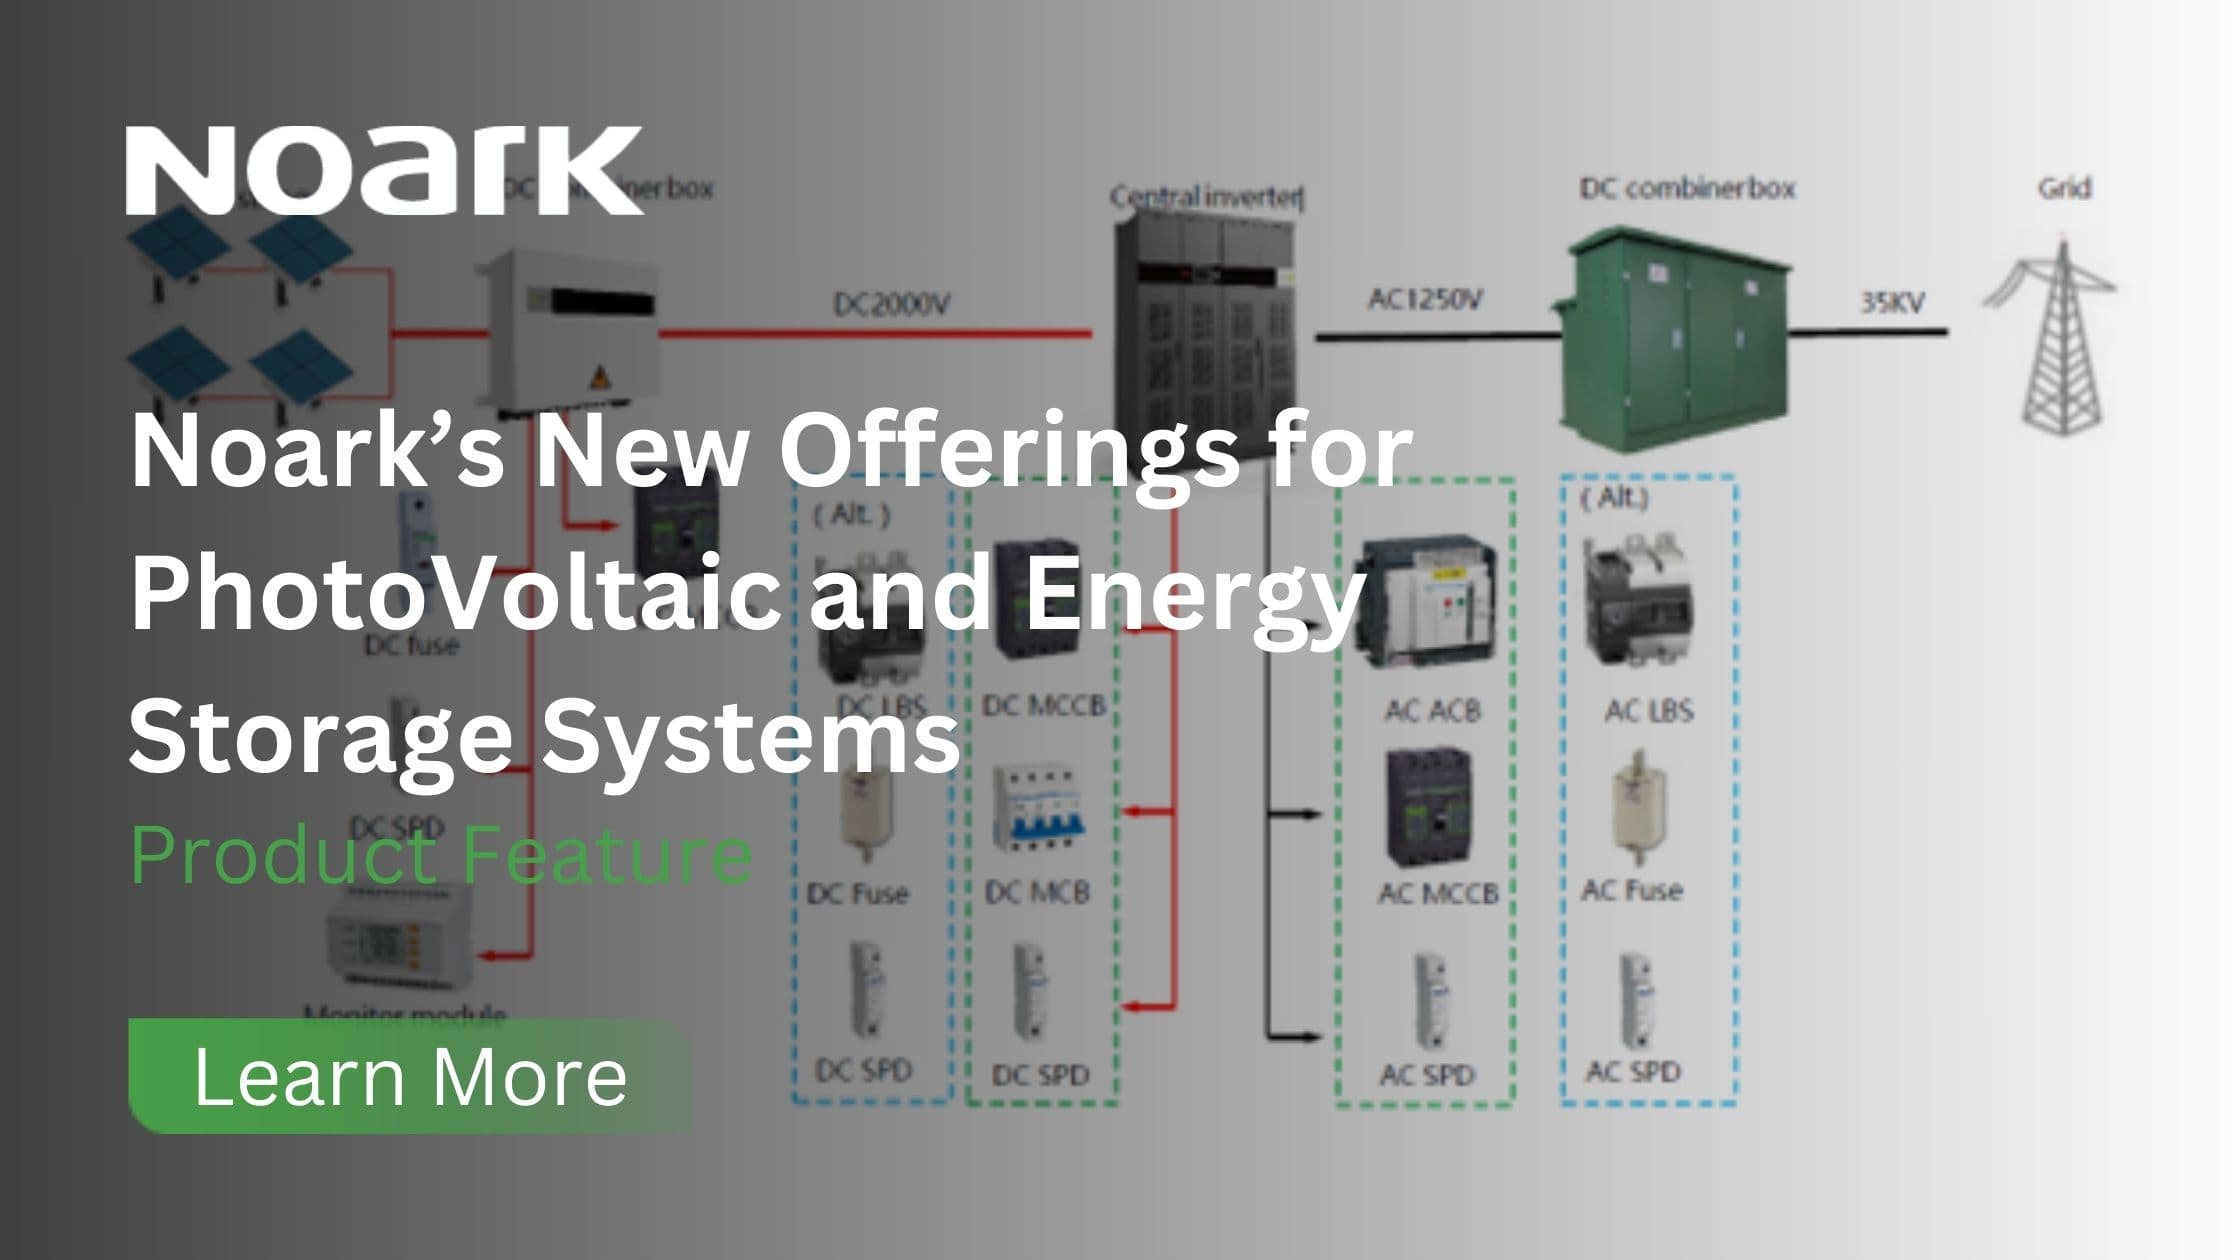 Noark’s New Offerings for PhotoVoltaic and Energy Storage Systems